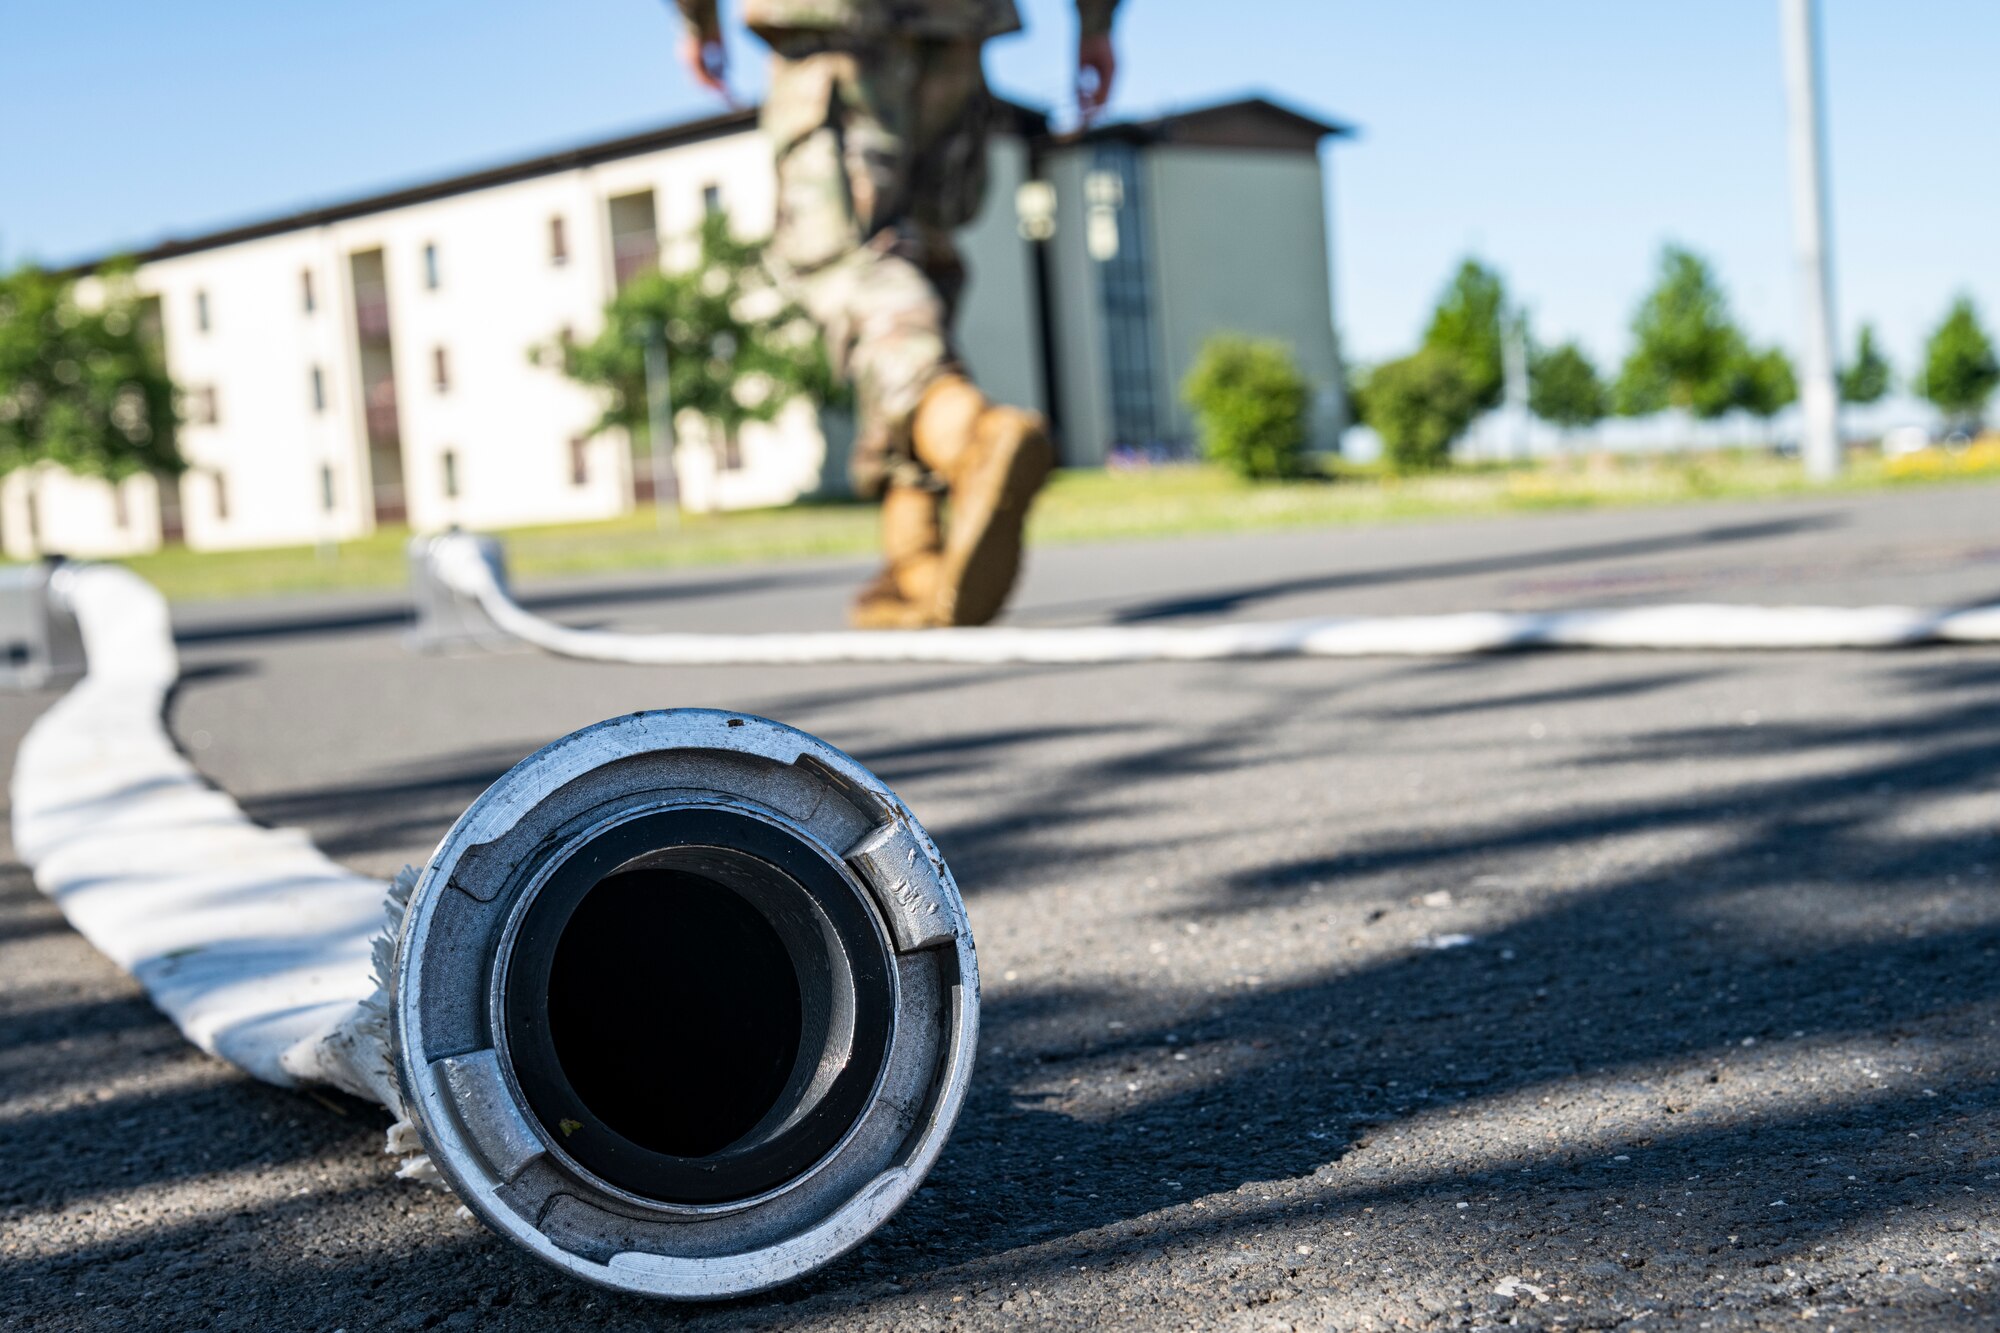 U.S. Air Force Senior Airman Nicolus Kocon, 52nd Civil Engineer Squadron water and fuel systems maintenance journeyman, prepares to connect a hose to a fire hydrant for a diagnostic test at Spangdahlem Air Base, Germany, June 14, 2022. Each hydrant on base needs to be hooked up to a hose and pressure gauge system to ensure it is functioning properly and is ready for use. (U.S. Air Force photo by Senior Airman Ali Stewart)